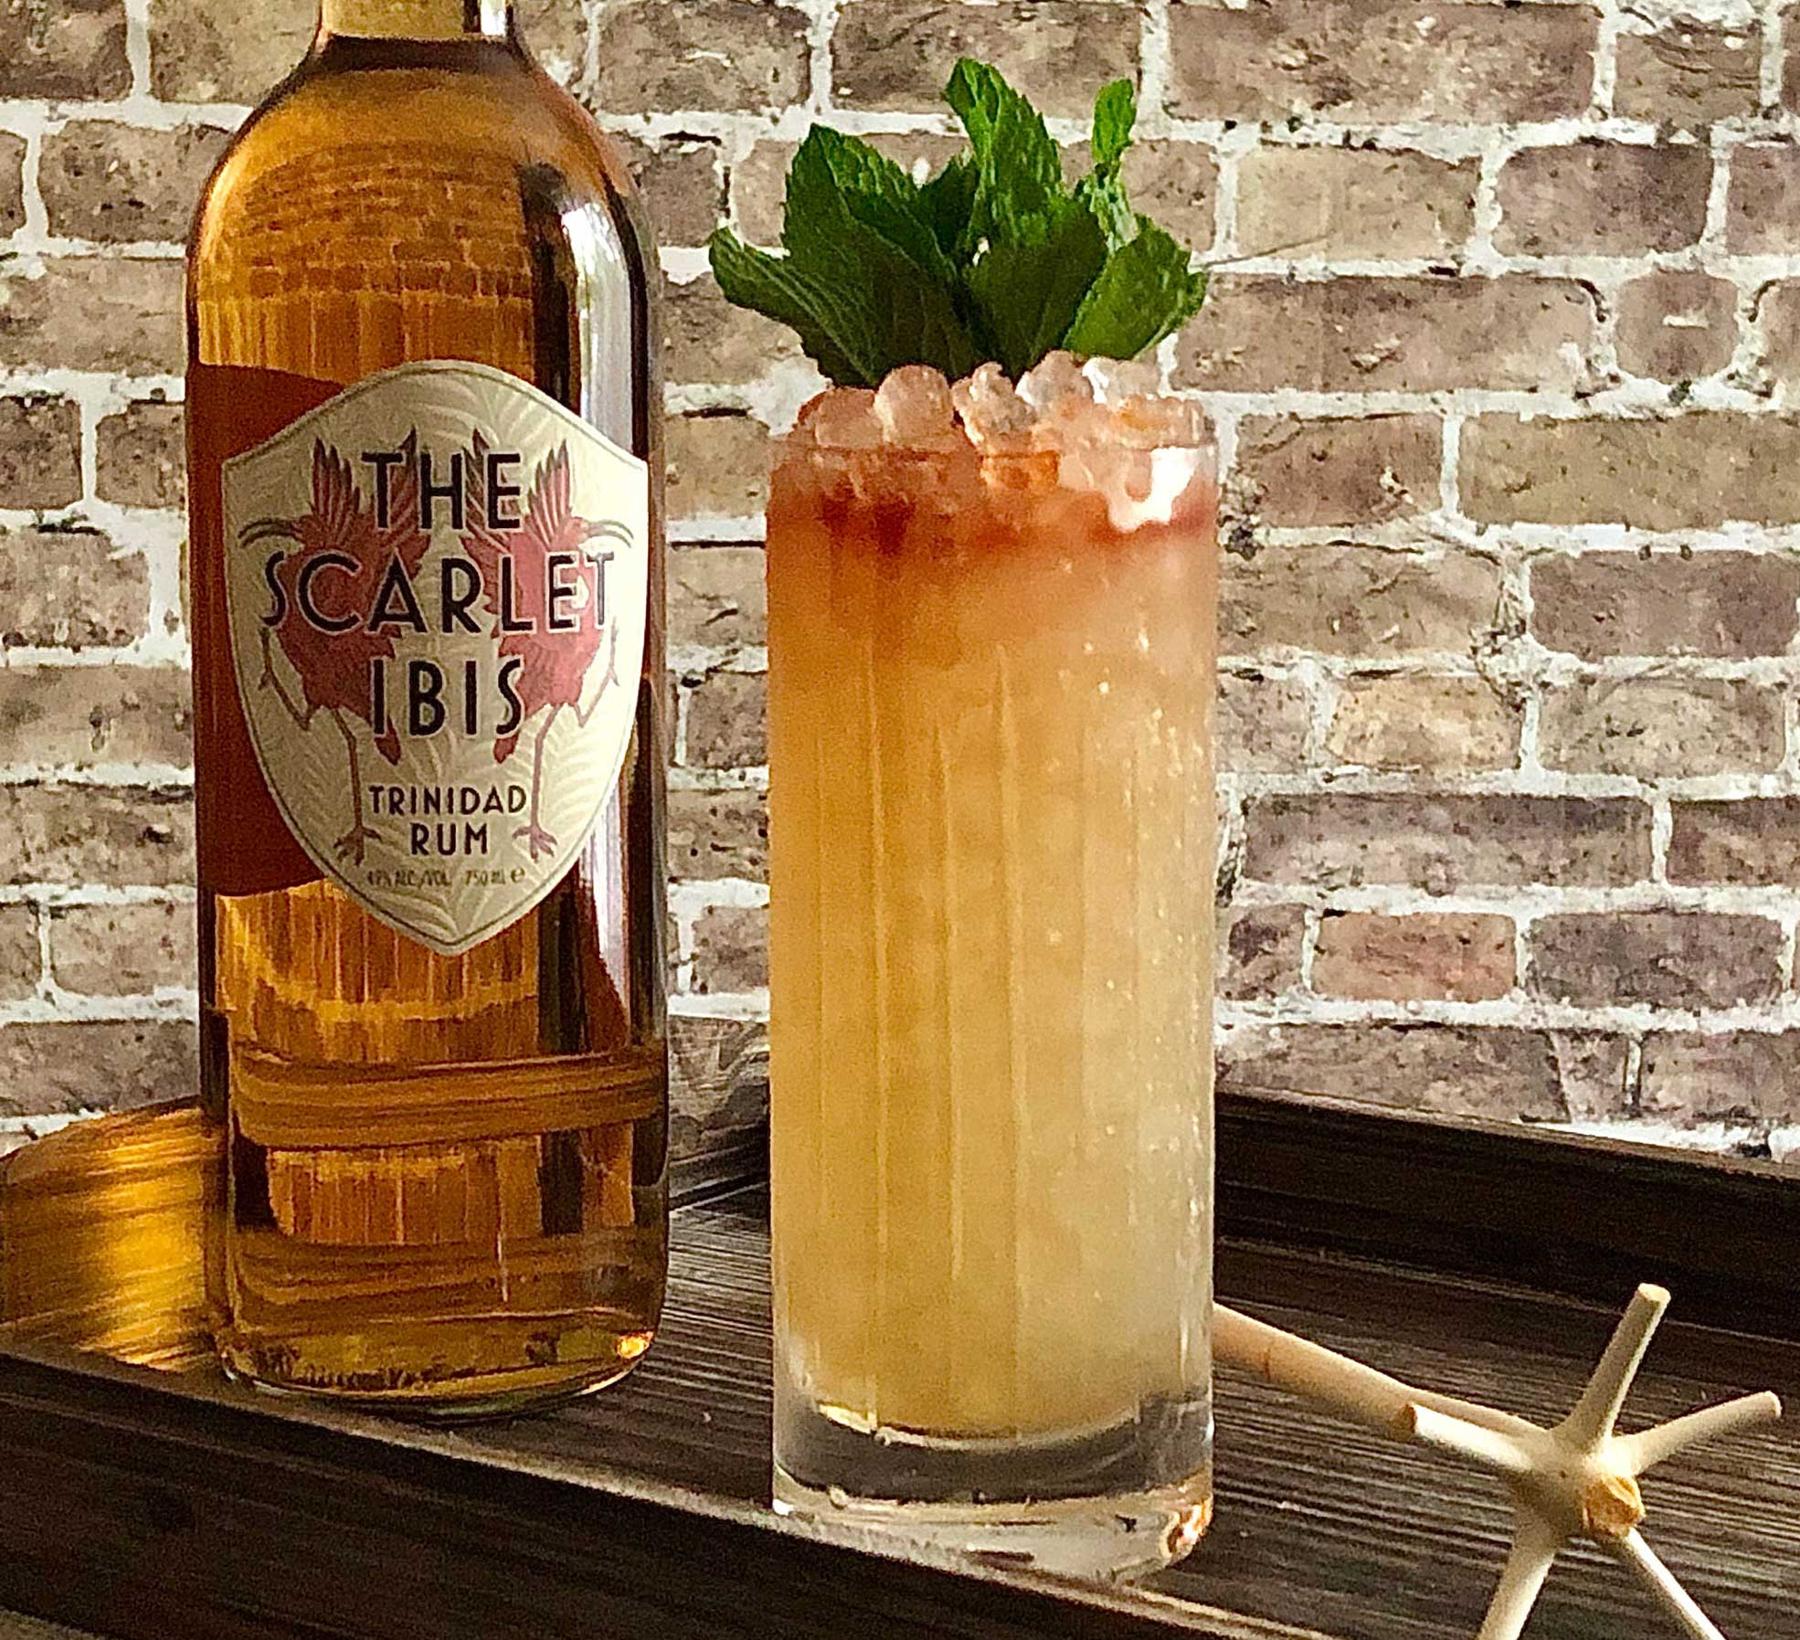 An example of the Queens Park Swizzle, the mixed drink (drink) featuring The Scarlet Ibis Trinidad Rum, lime juice, rich demerara syrup, Angostura bitters, mint leaves, and sprig of mint; photo by Lee Edwards